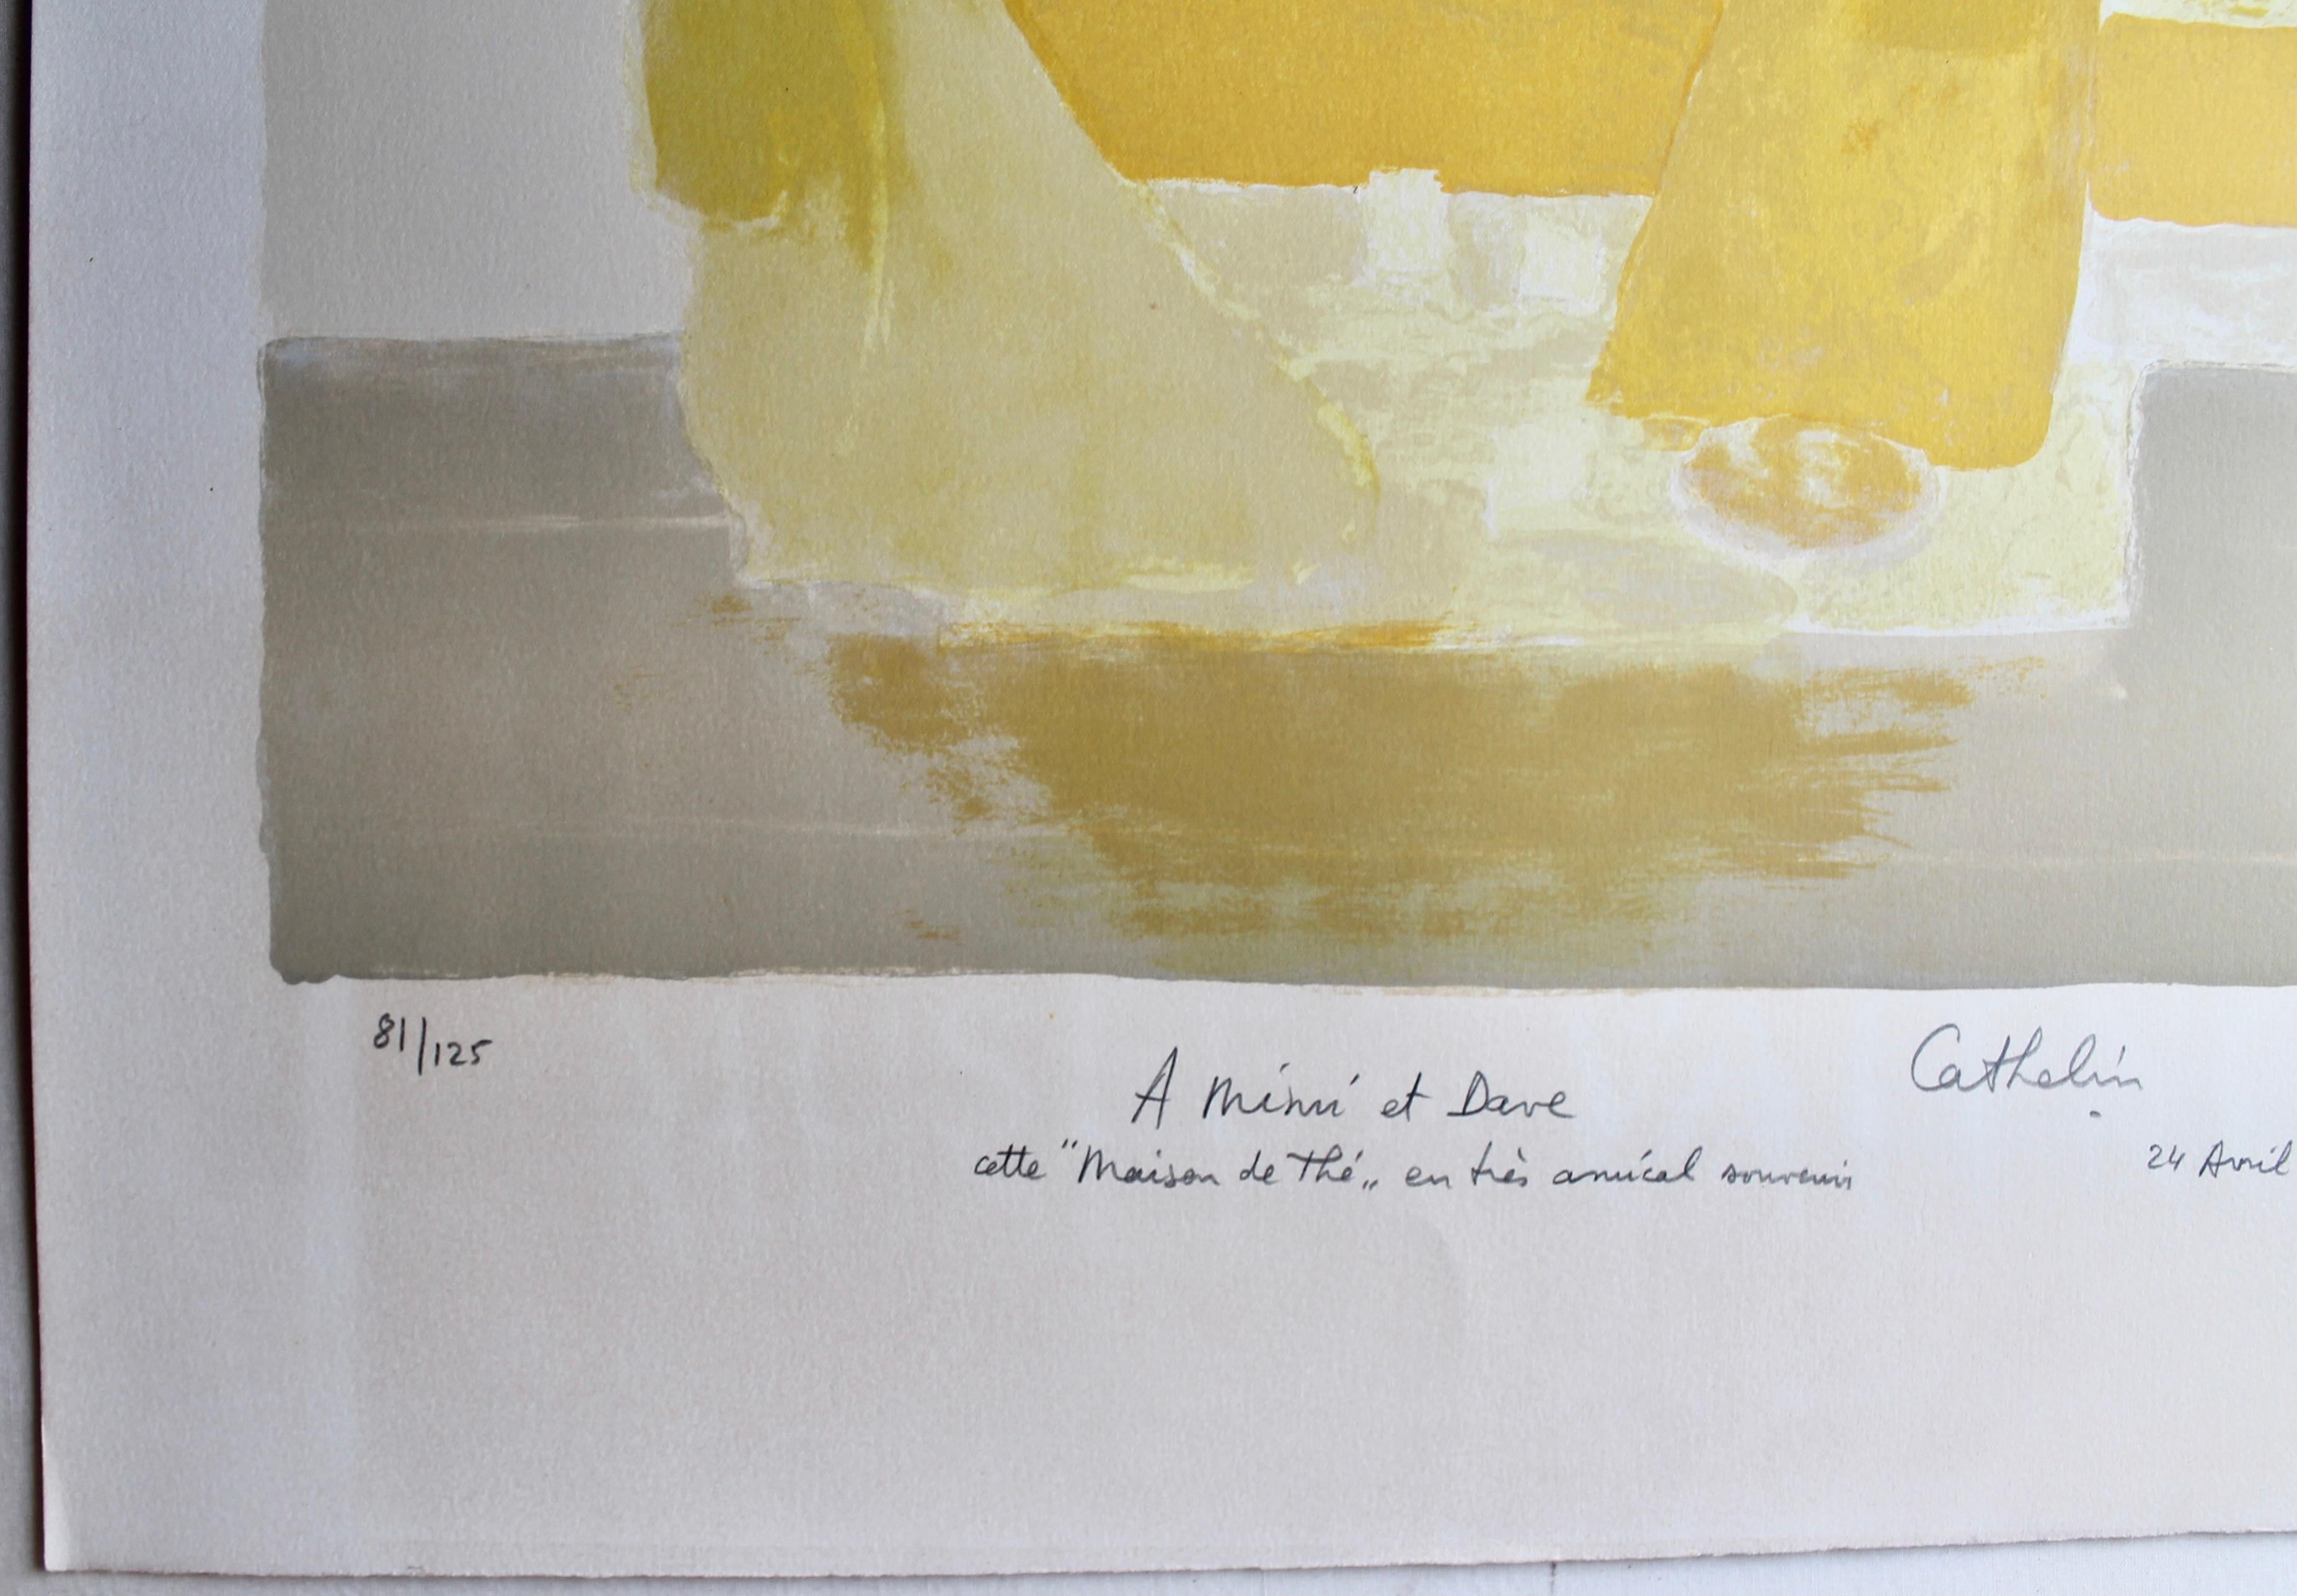 Mid-Century Modern Bernard Cathelin Original 1976 Lithograph Annotated to his dealer David Findley